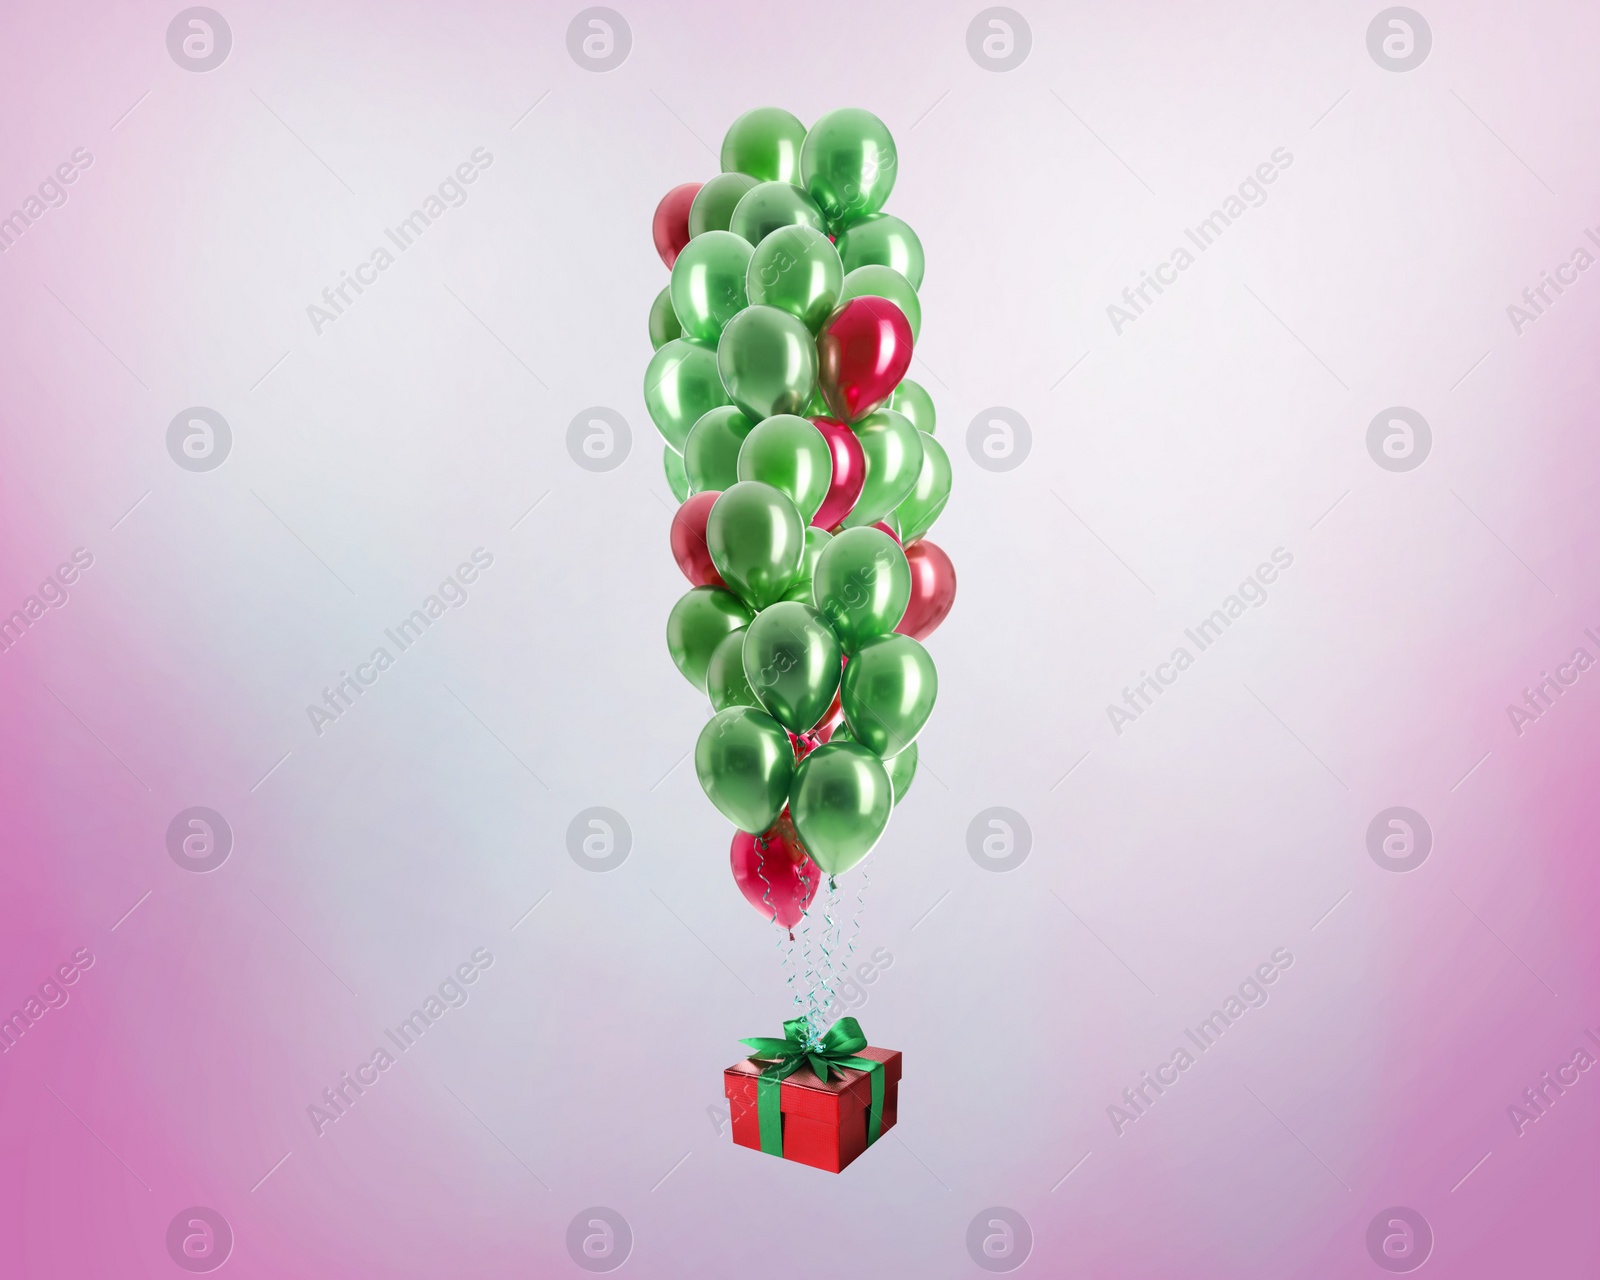 Image of Many balloons tied to gift box on color background